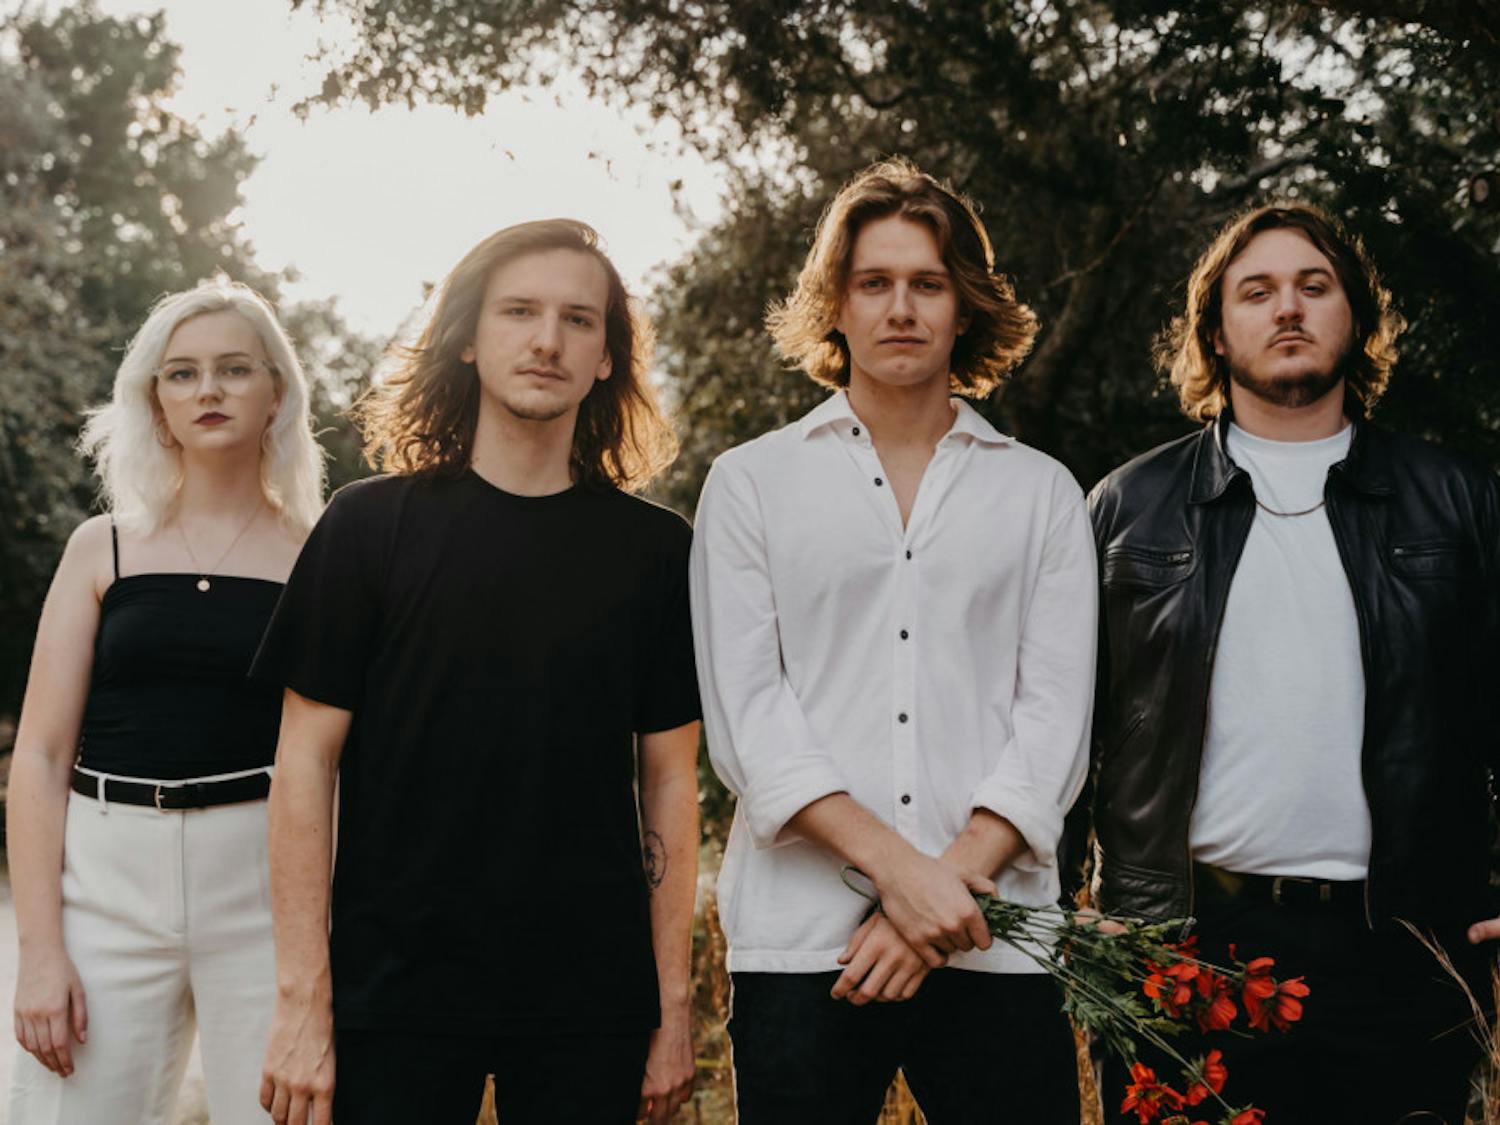 (L-R) Madeline Jarman (bass), Tristan Duncan (guitar), Dillon Basse (vocals) and Adrian Walker (drums) of flipturn will be kickstarting their 2020 "Something You Needed" tour at High Dive this Saturday.
&nbsp;